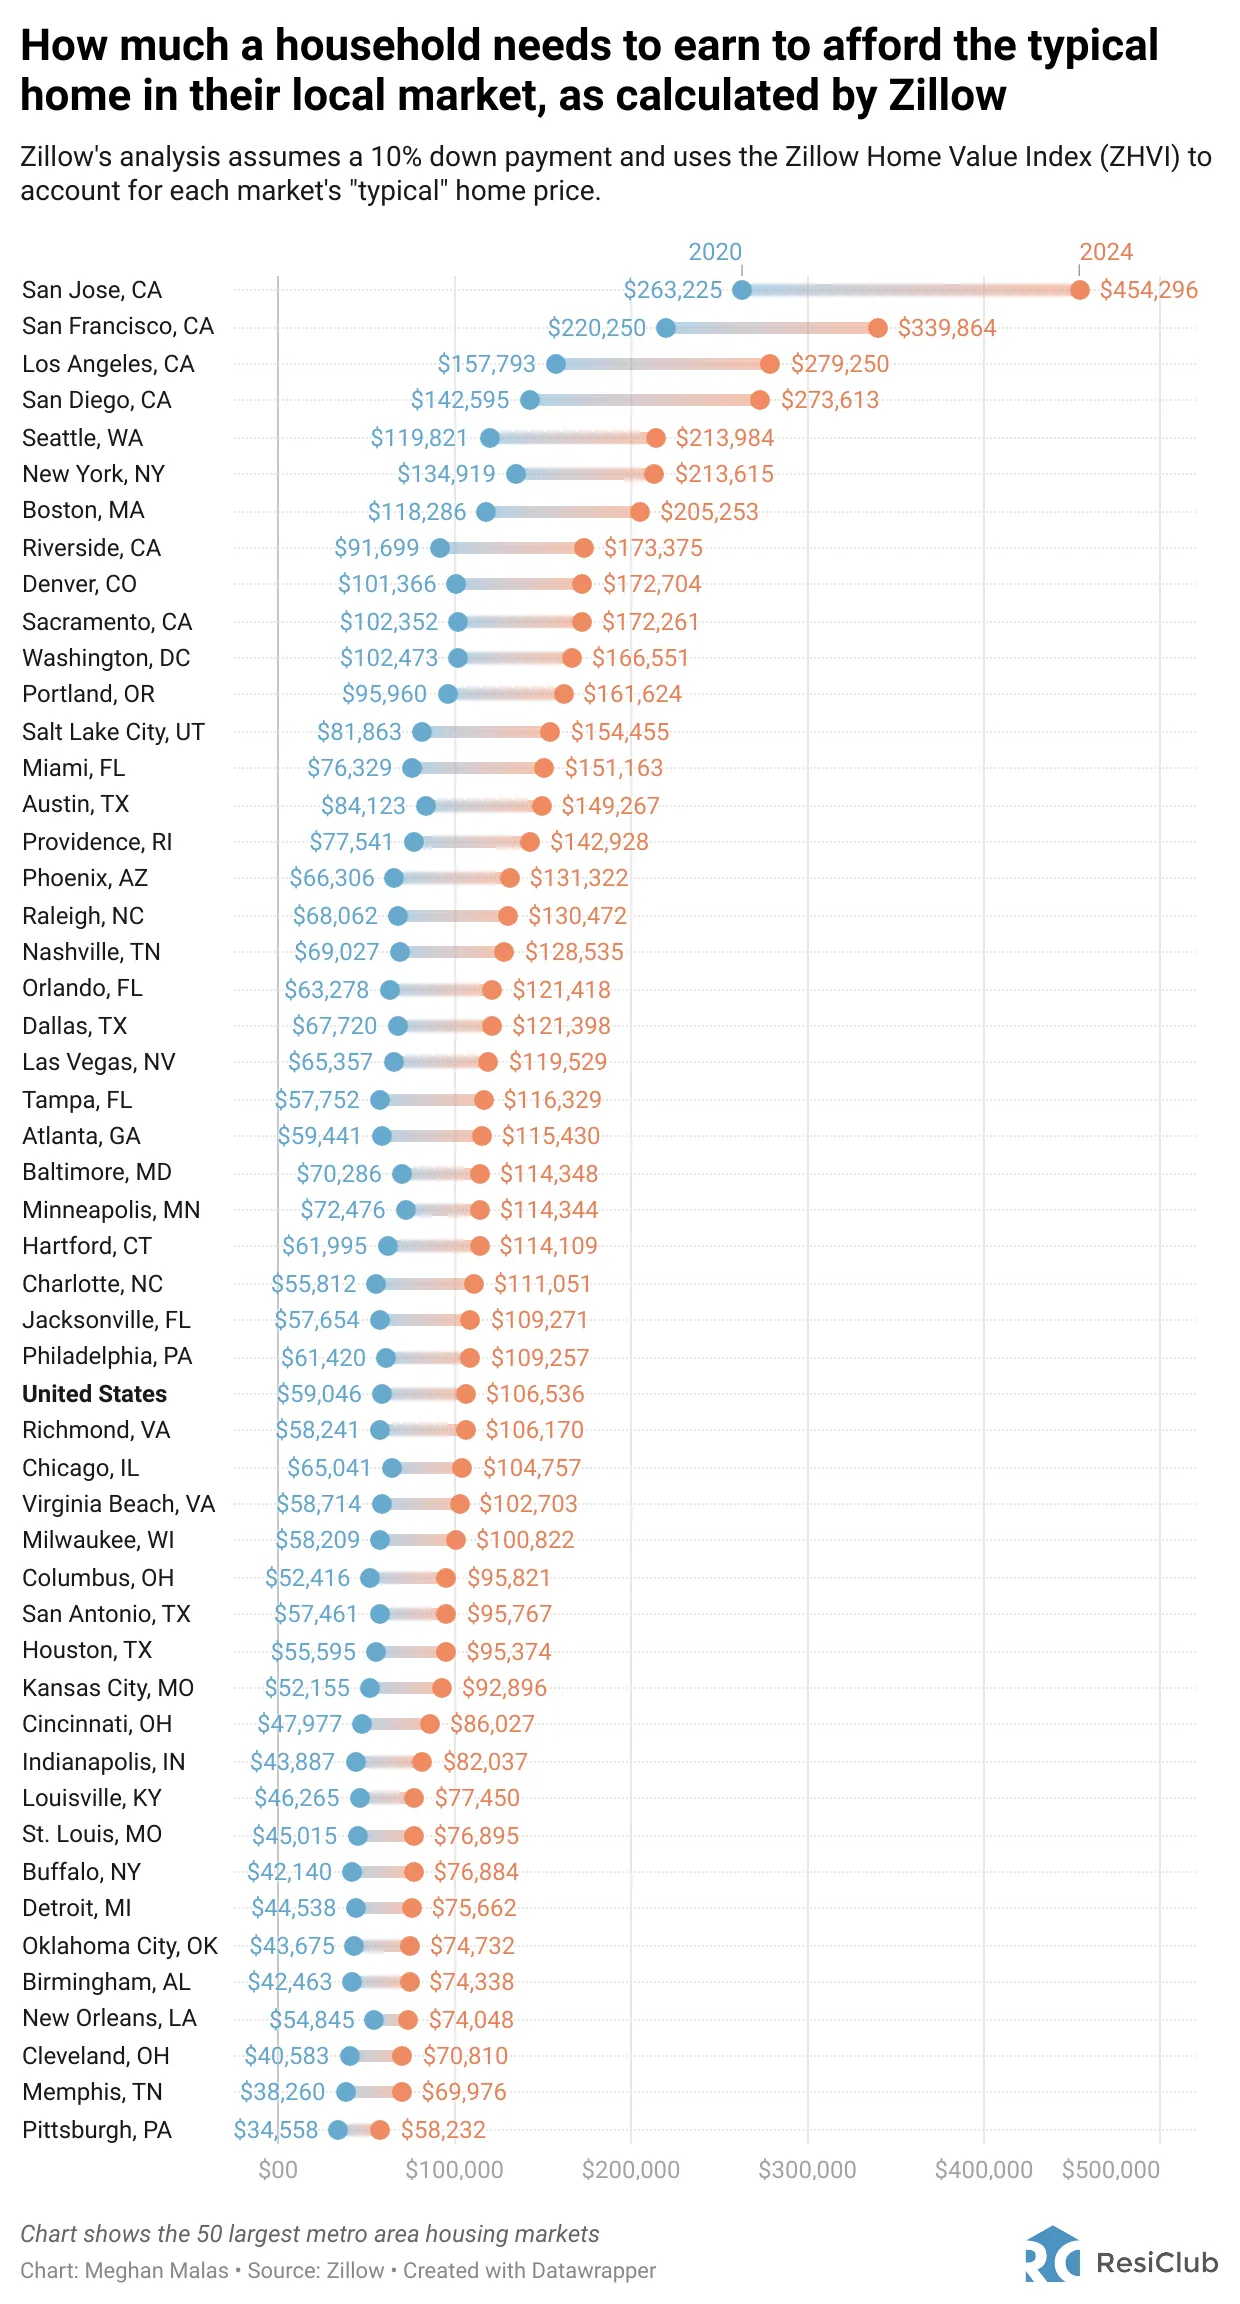 Amount of income needed by the top 50 American cities to afford a typical home